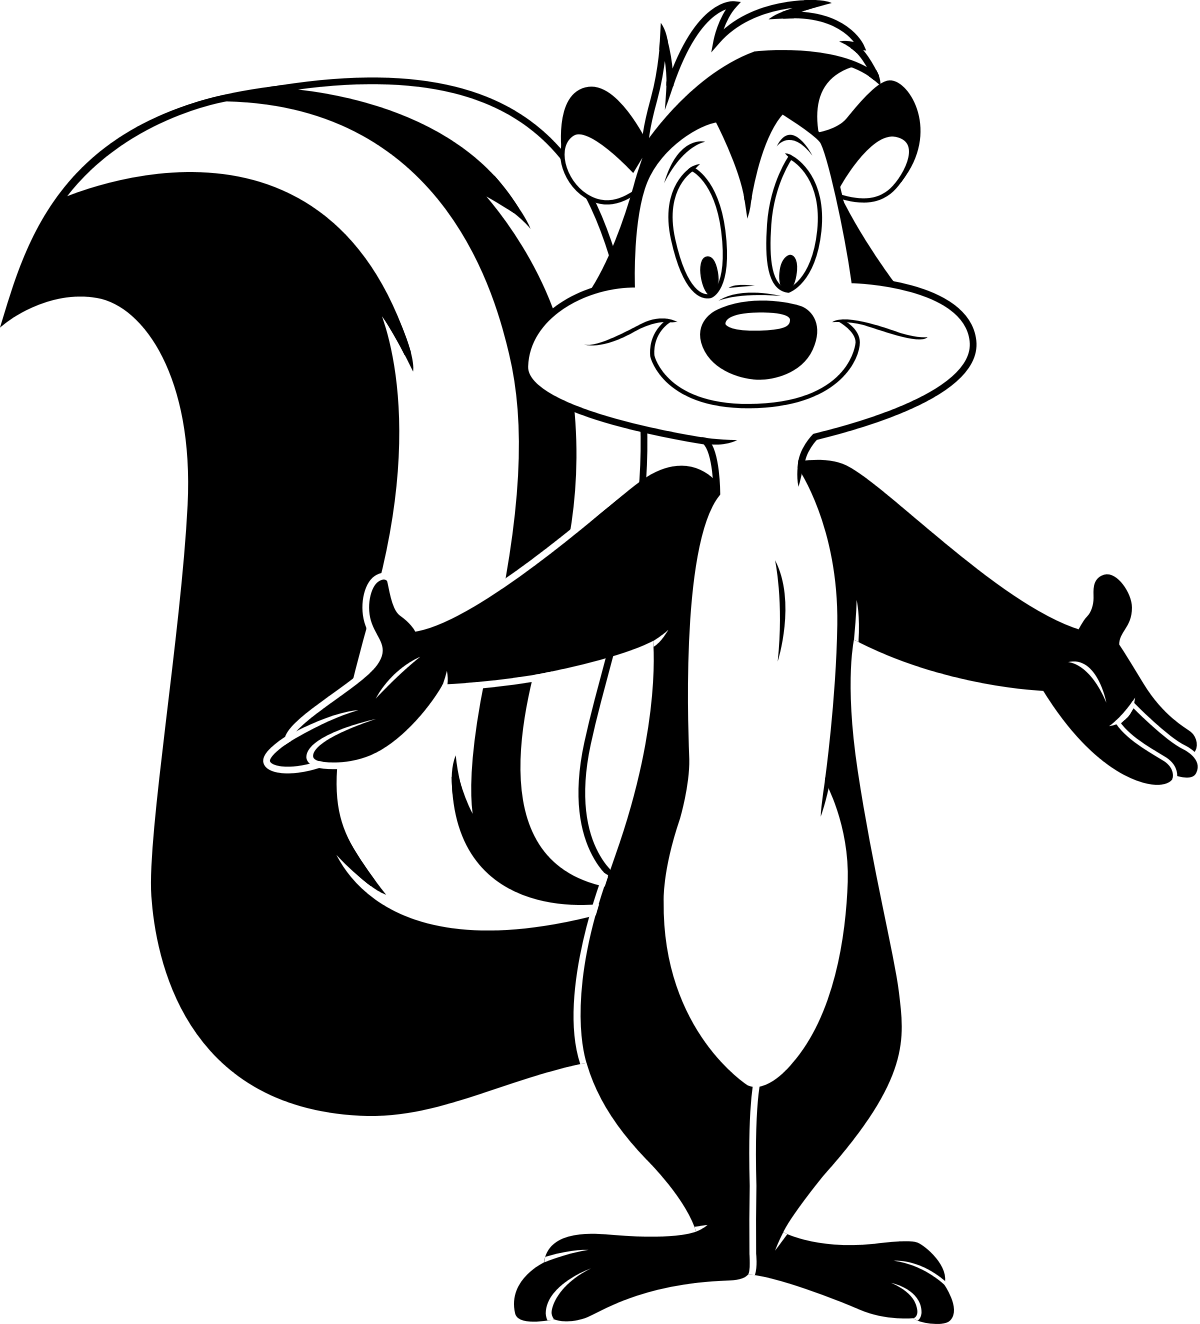 Racoon clipart chester. Pep le pew wikipedia